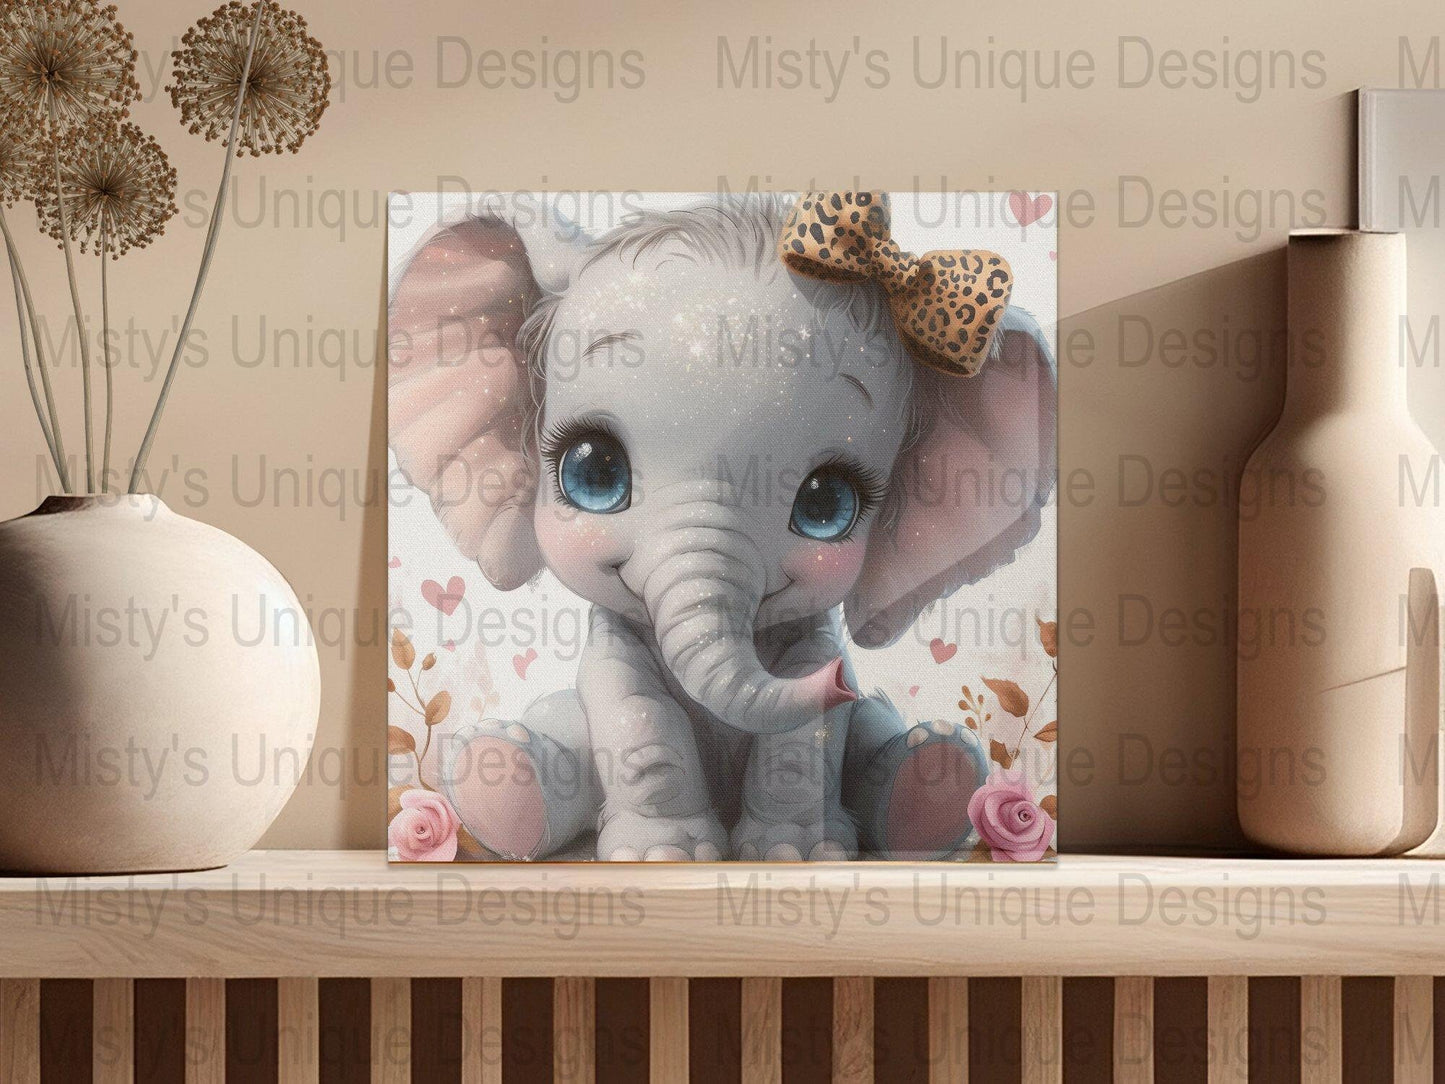 Cute Elephant Digital Paper, Nursery Decor, Baby Room Wall Art, Printable PNG, Animal Illustration, Pastel Colors, Instant Download